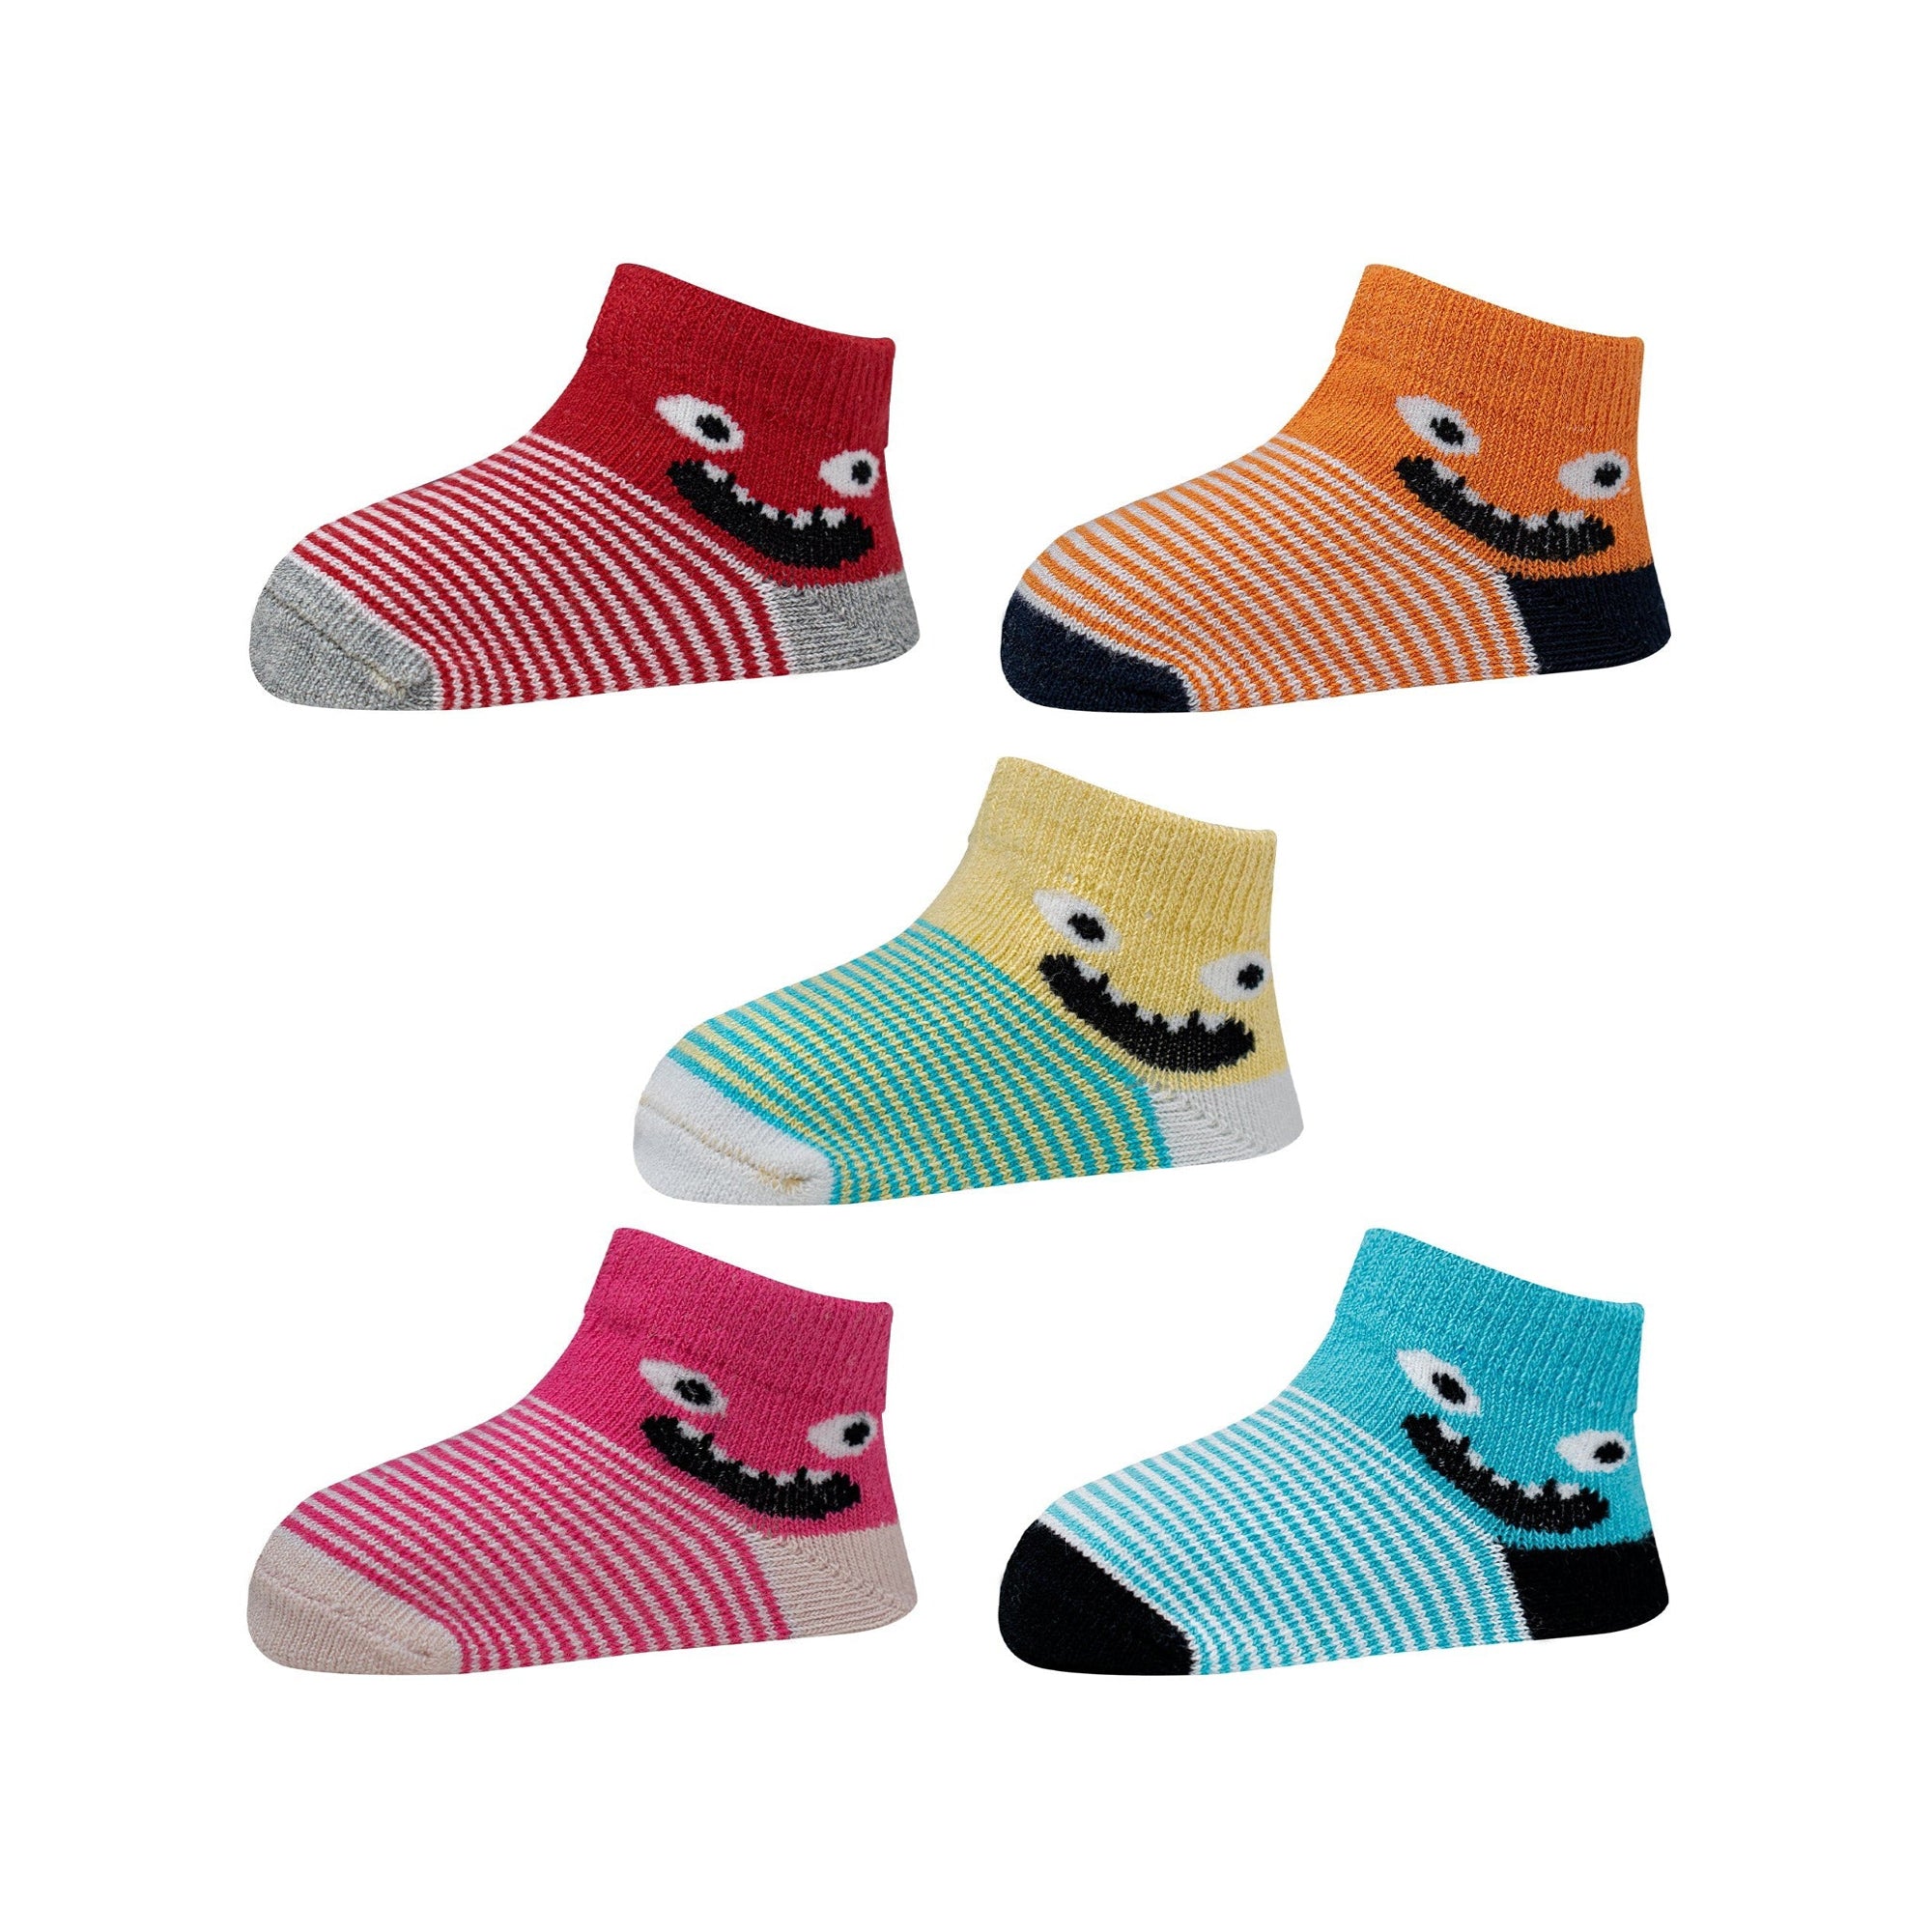 Kids Cotton Antibacterial Ankle length Socks - YW-ASP-8016 - Pack of 5 Pairs